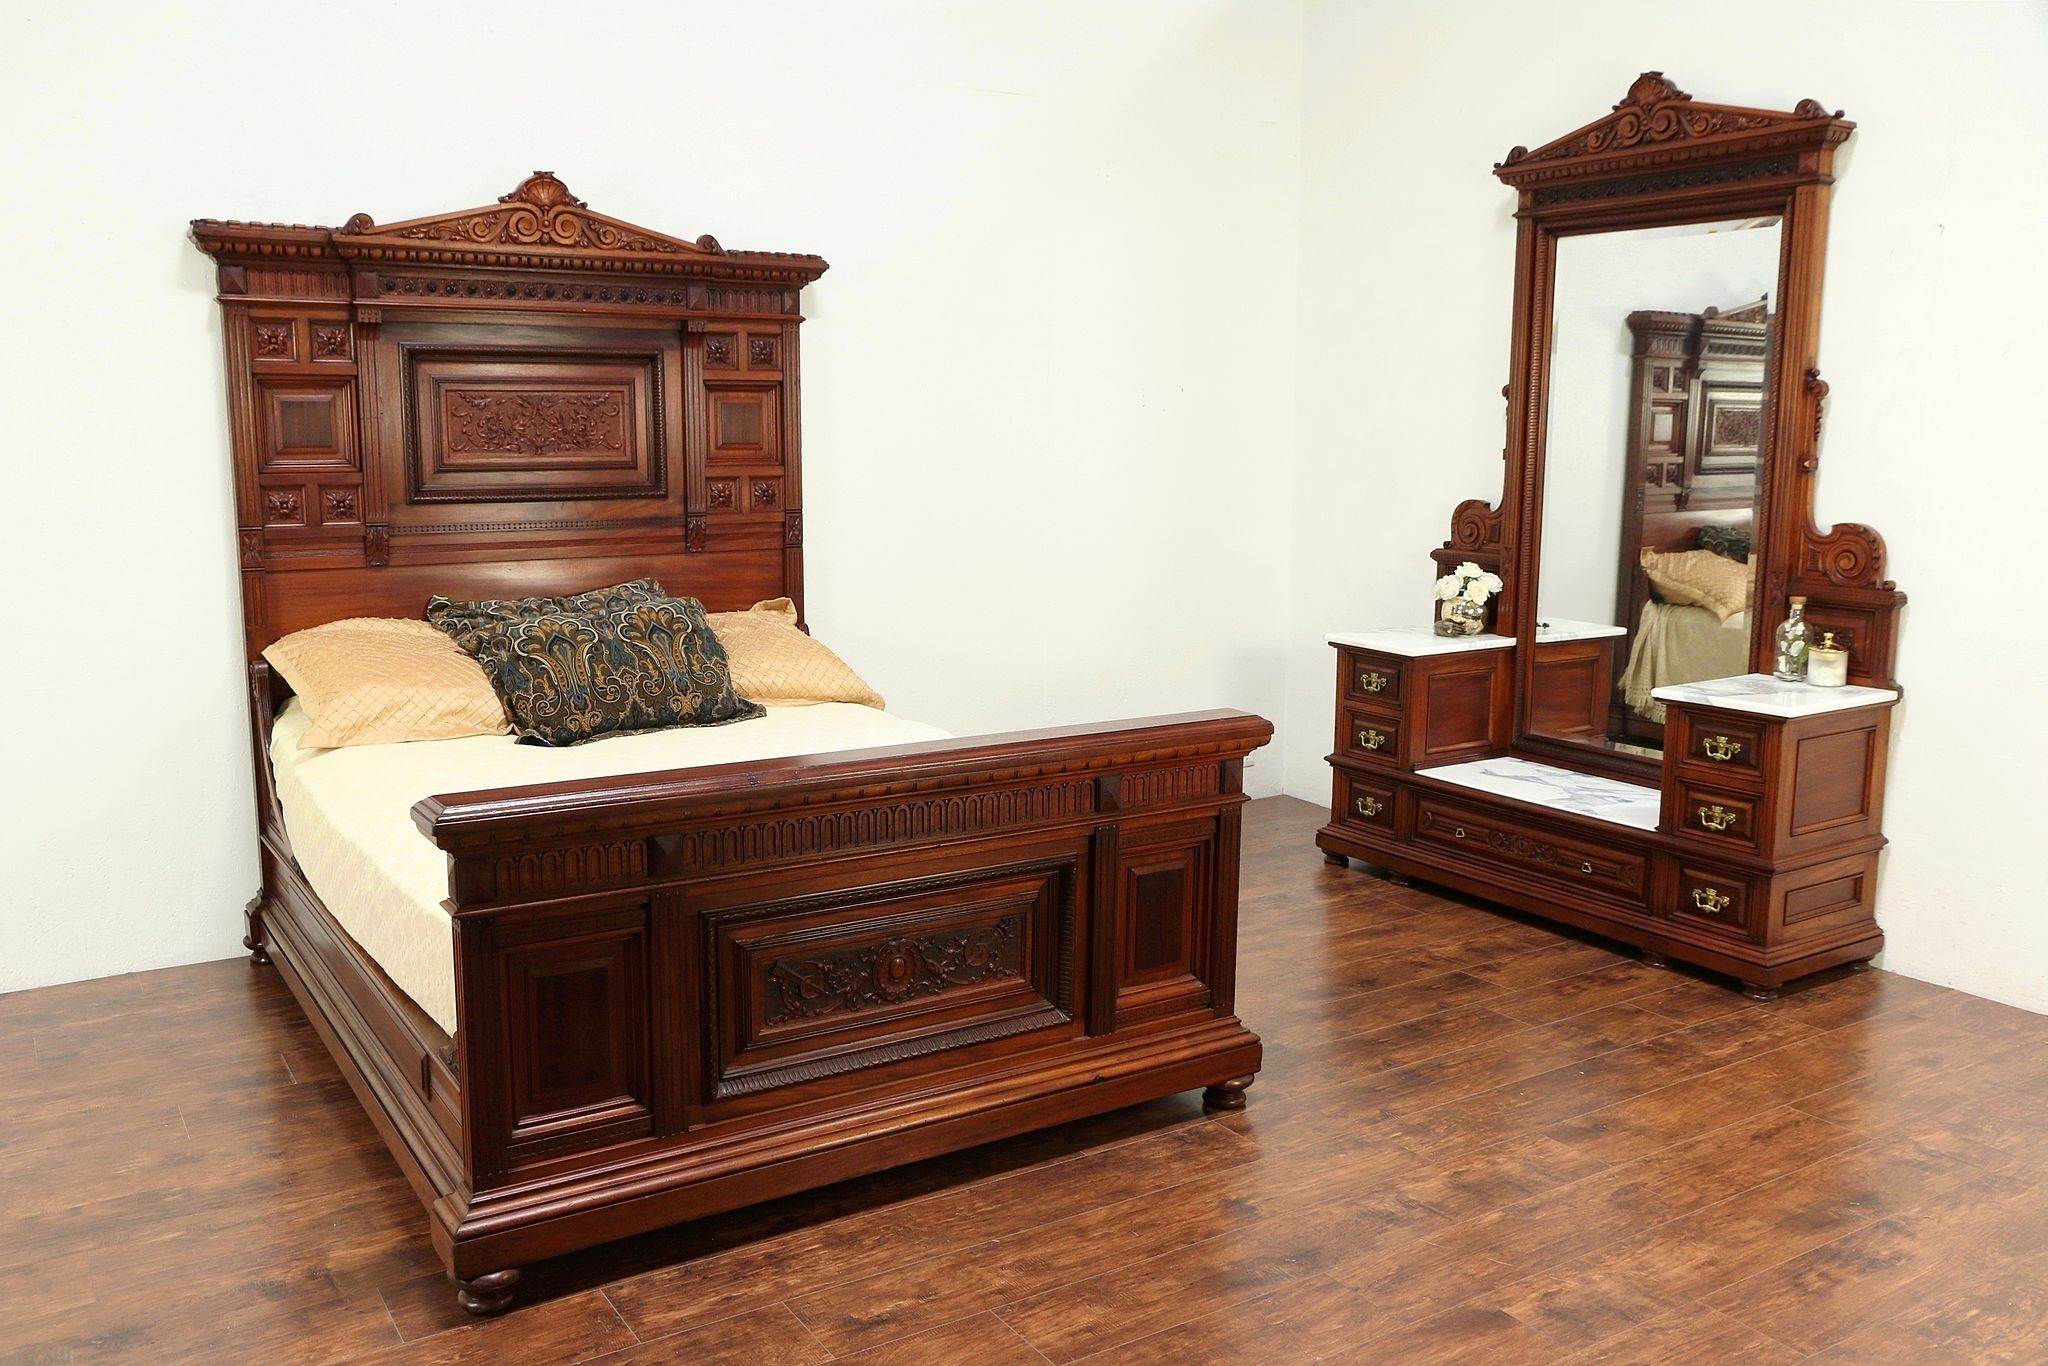 Sold Victorian Antique Mahogany Near Queen Size 2 Pc Marble Top Bedroom Set 29244 Harp Gallery Antiques Furniture